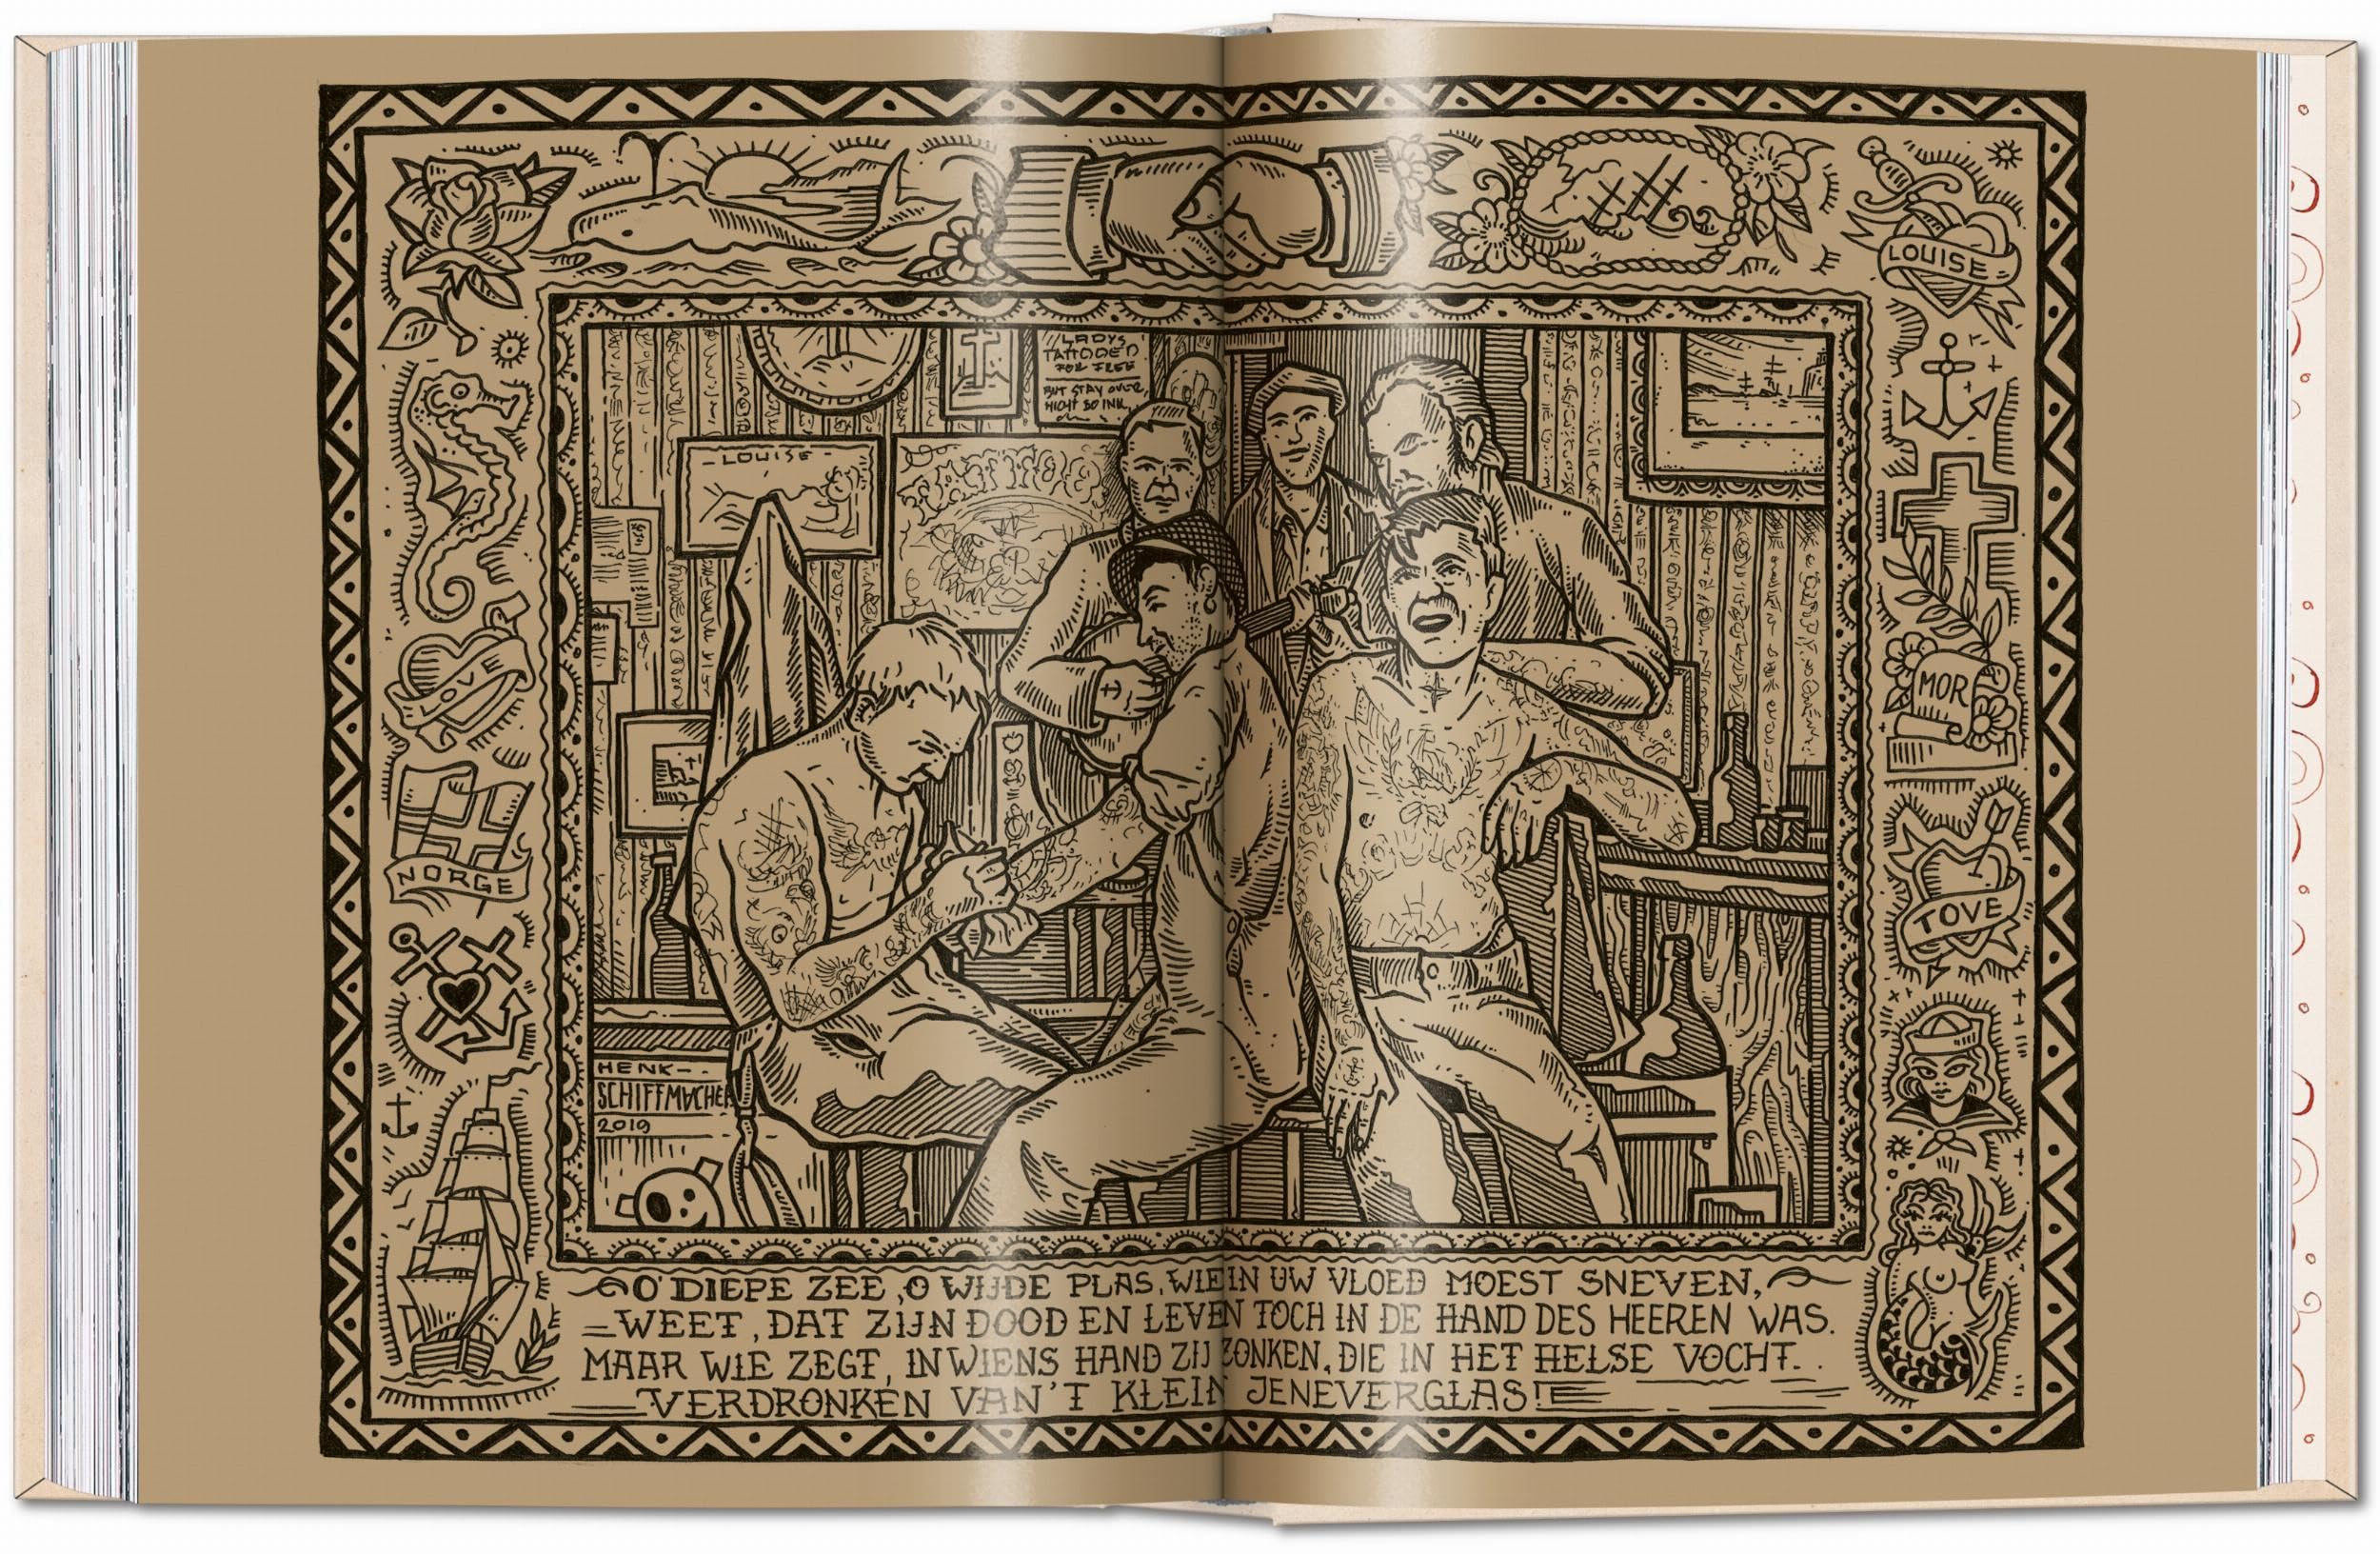 Tattoo: 1730s-1970s; Henk Schiffmacher’s Private Collection of the Art and Its Makers